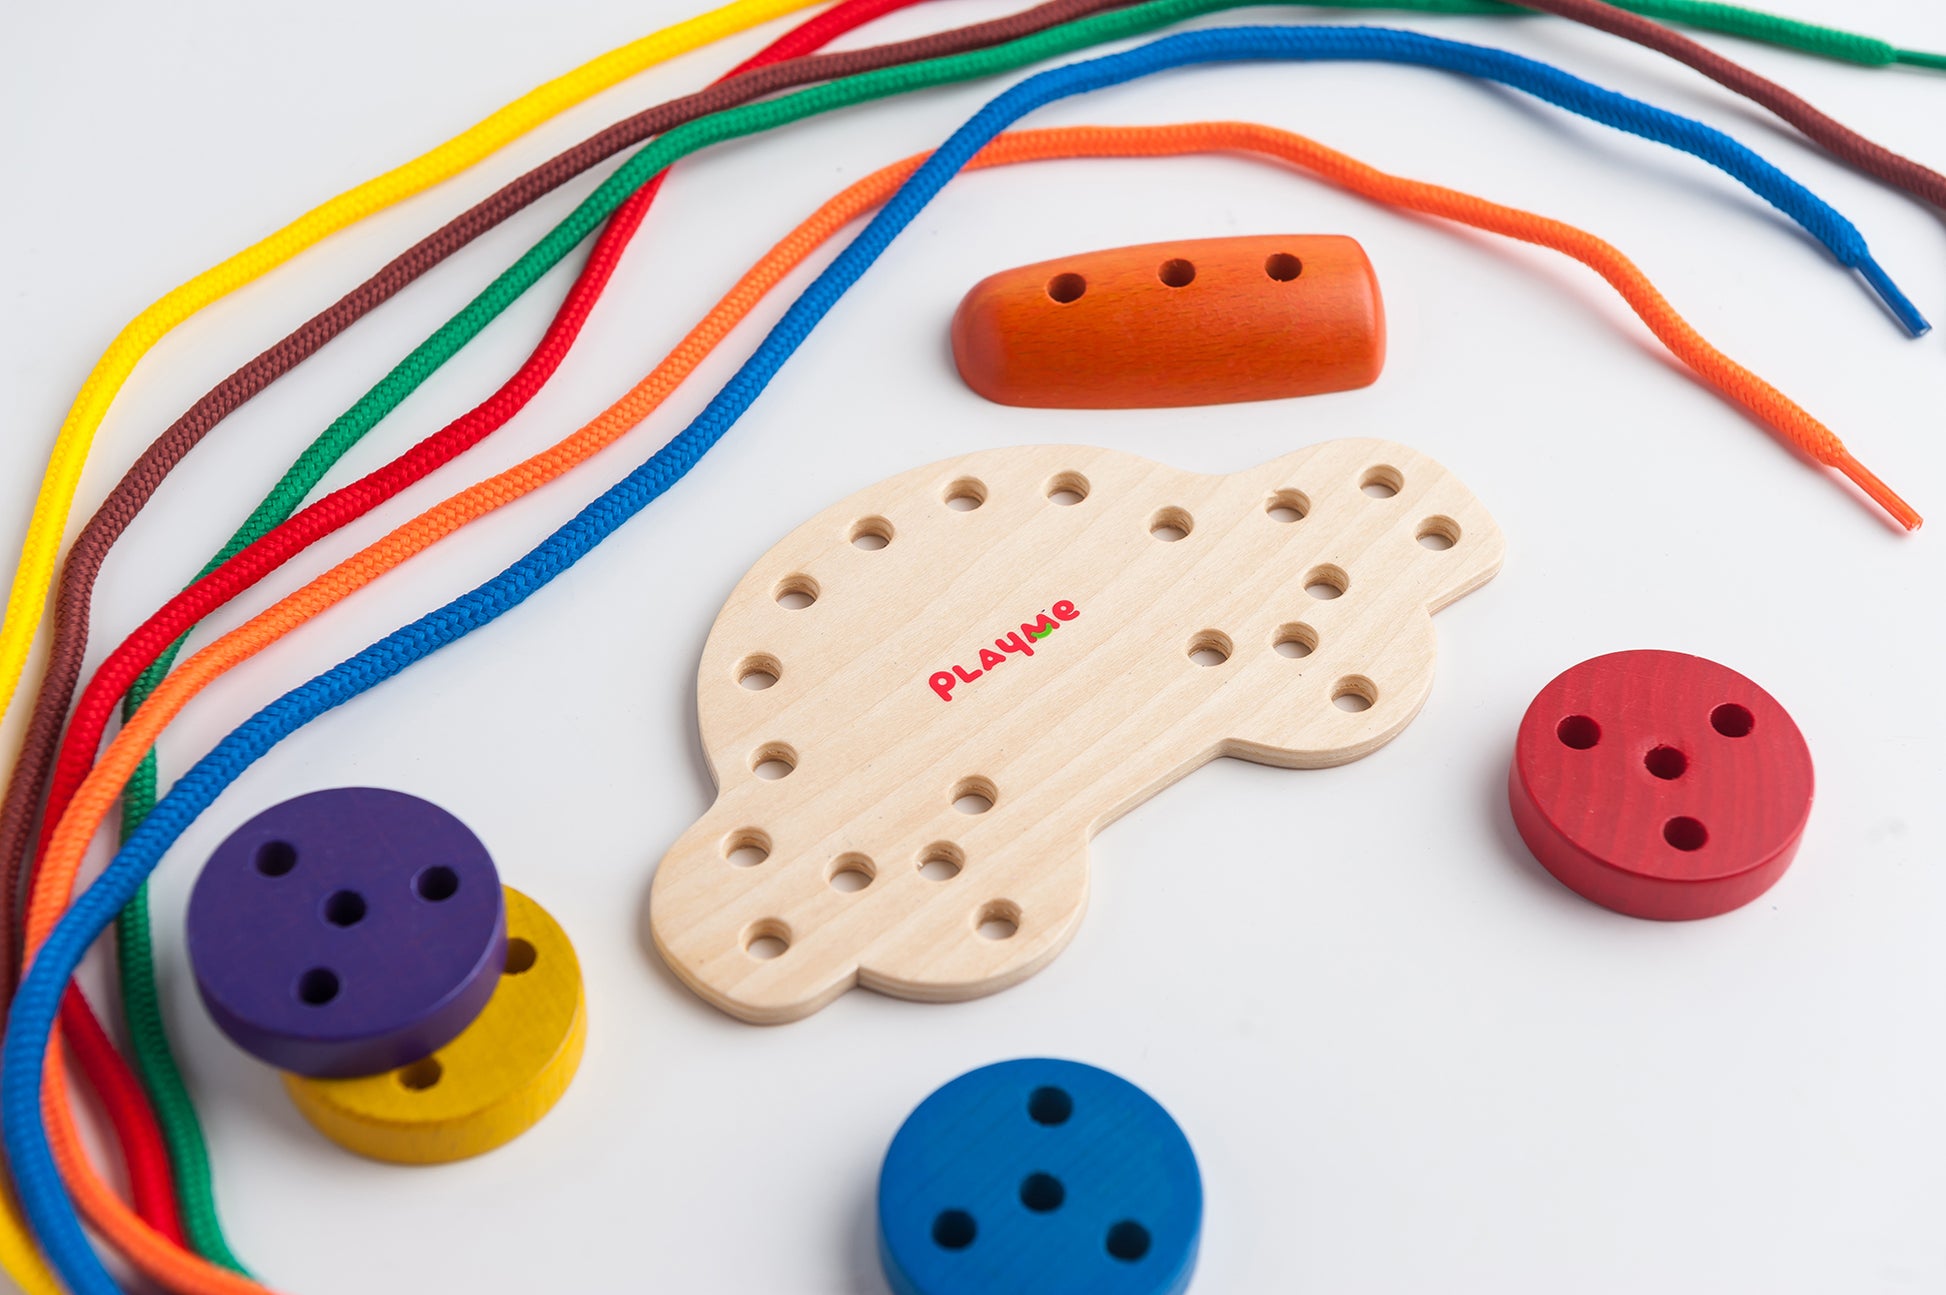 Playme - Sewing Toy (6945572978722)